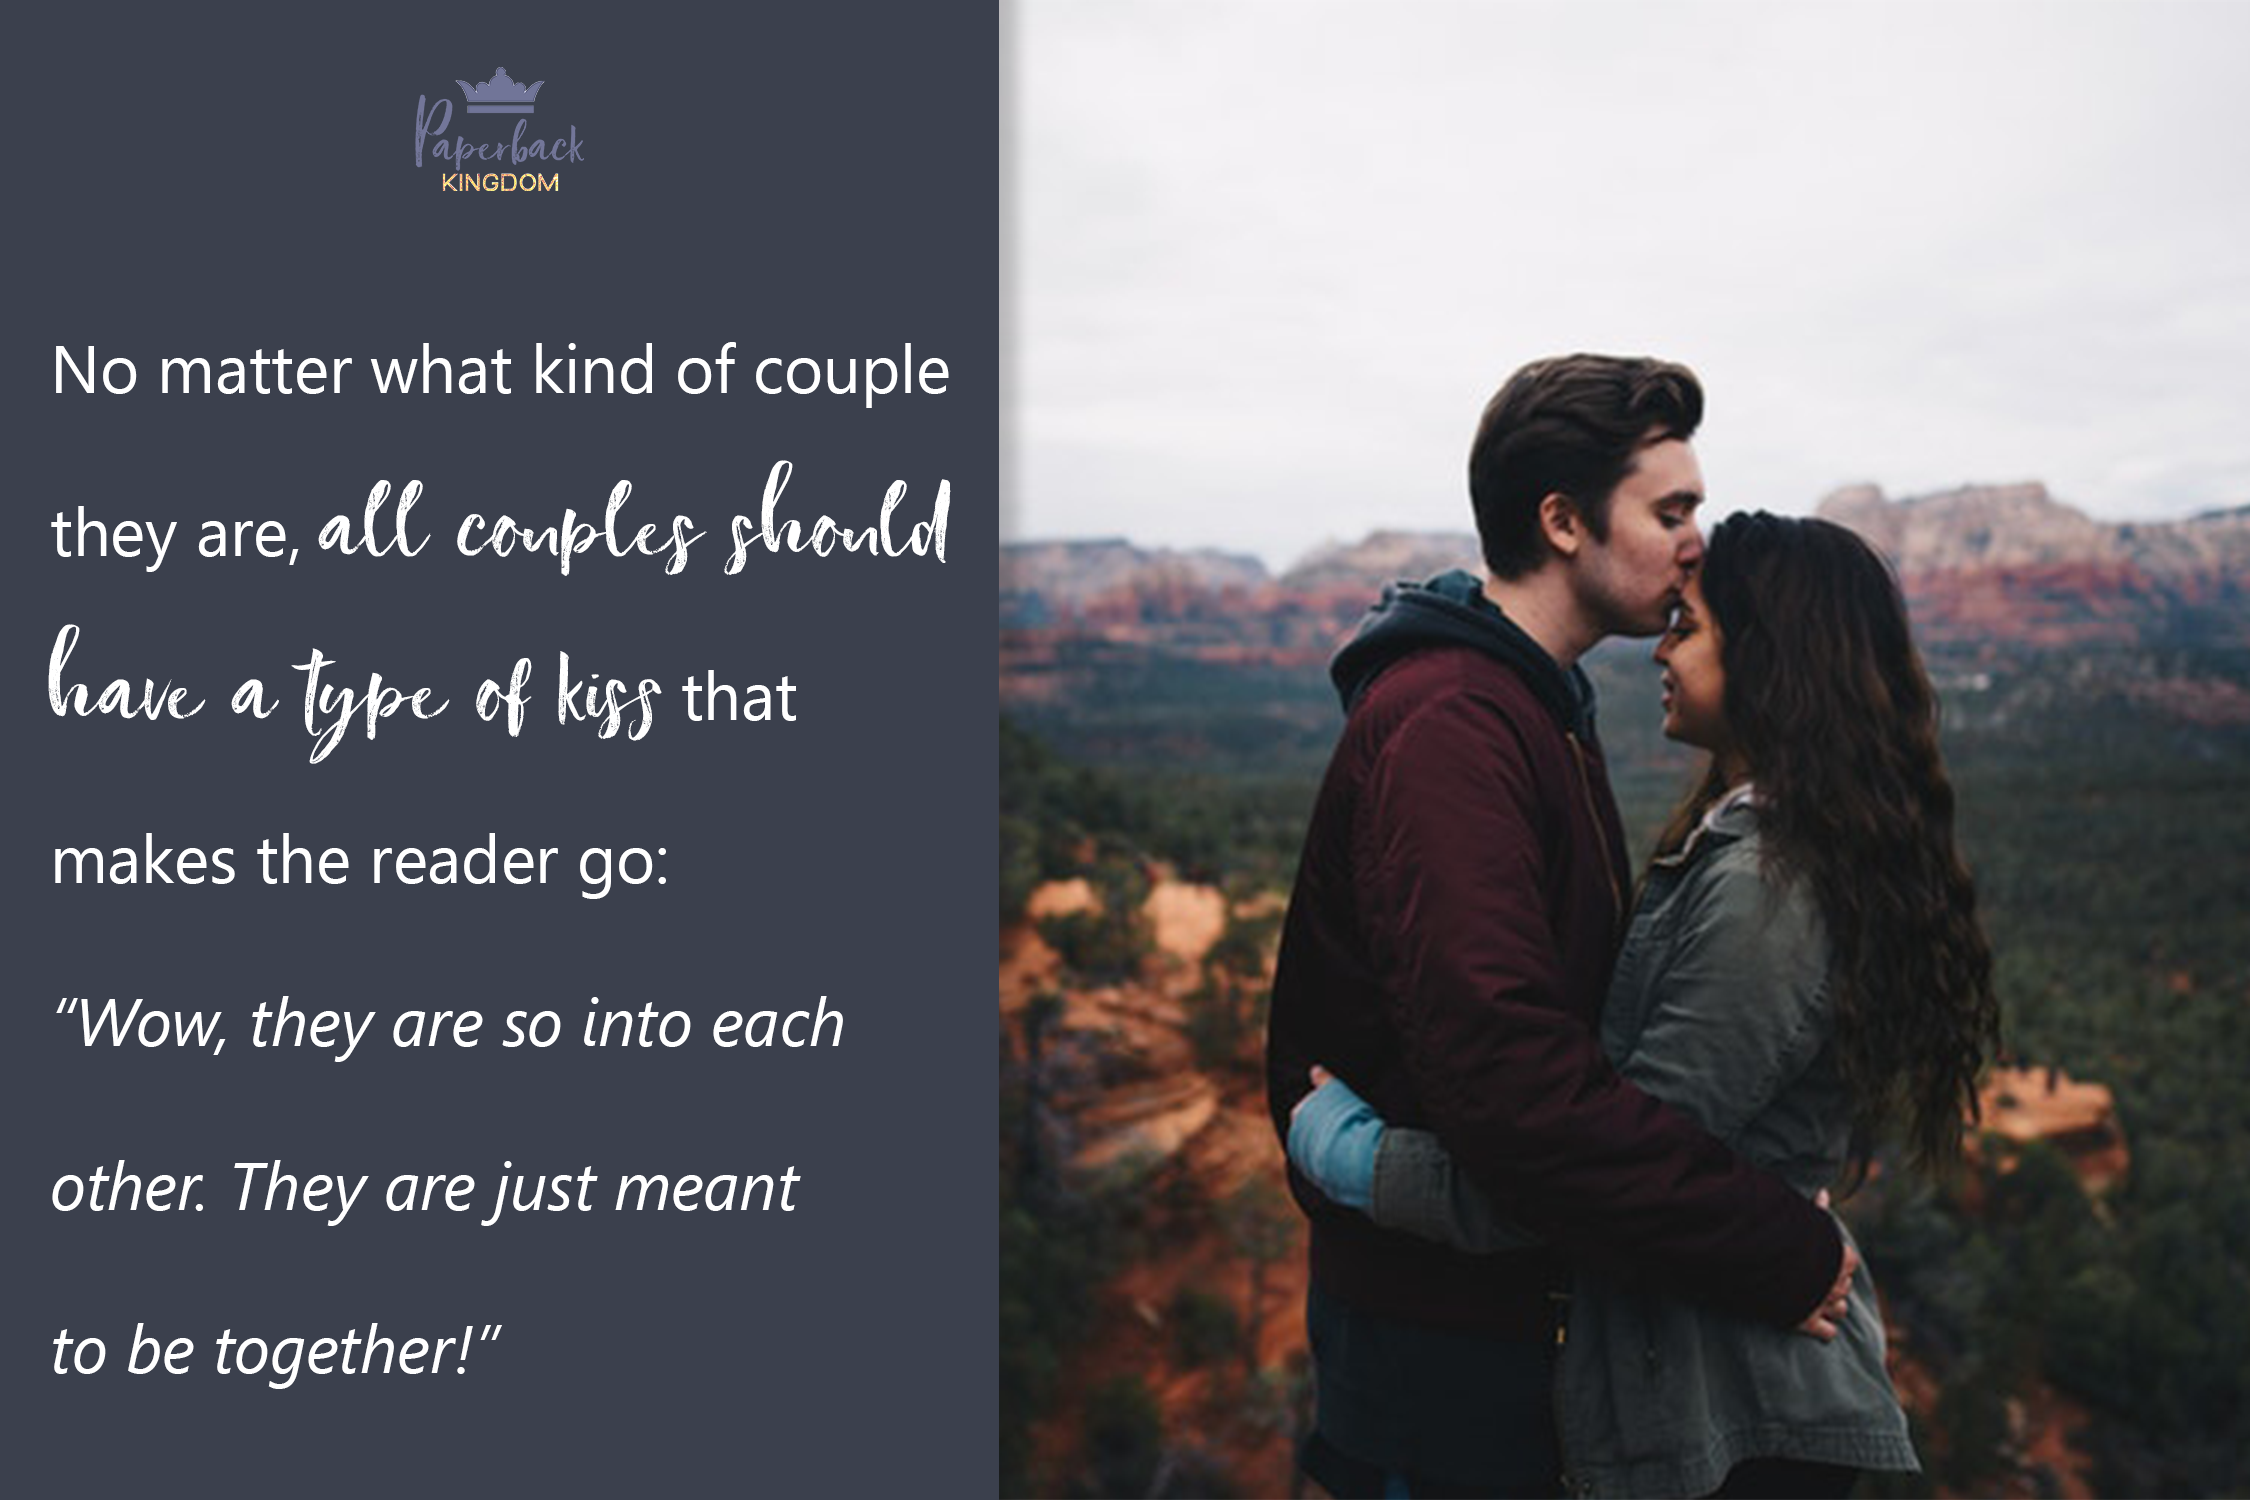 No matter what kind of couple they are, all couples should have a type of kiss that makes the reader go: “Wow, they are so into each other. They are just meant to be together!”